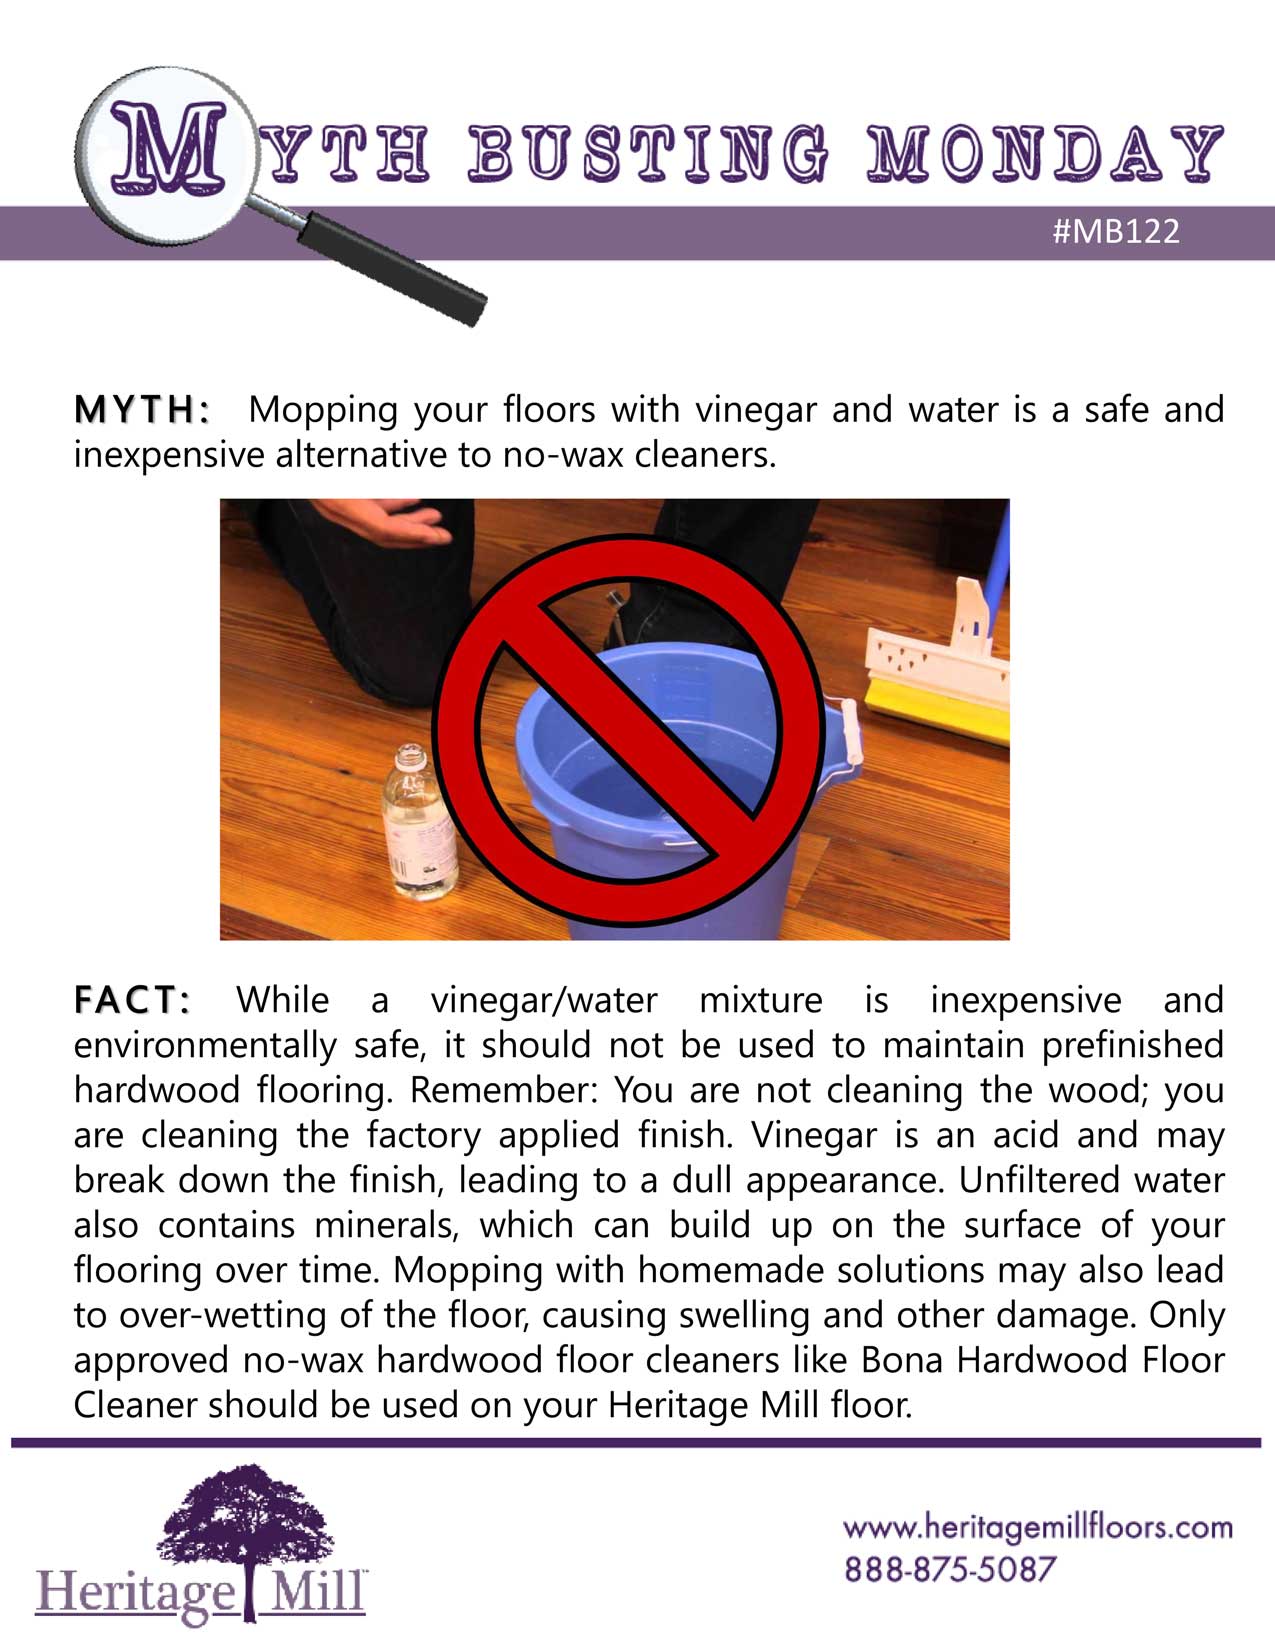 Mopping your floors with vinegar and water is a safe and inexpensive alternative to no-wax cleaners.